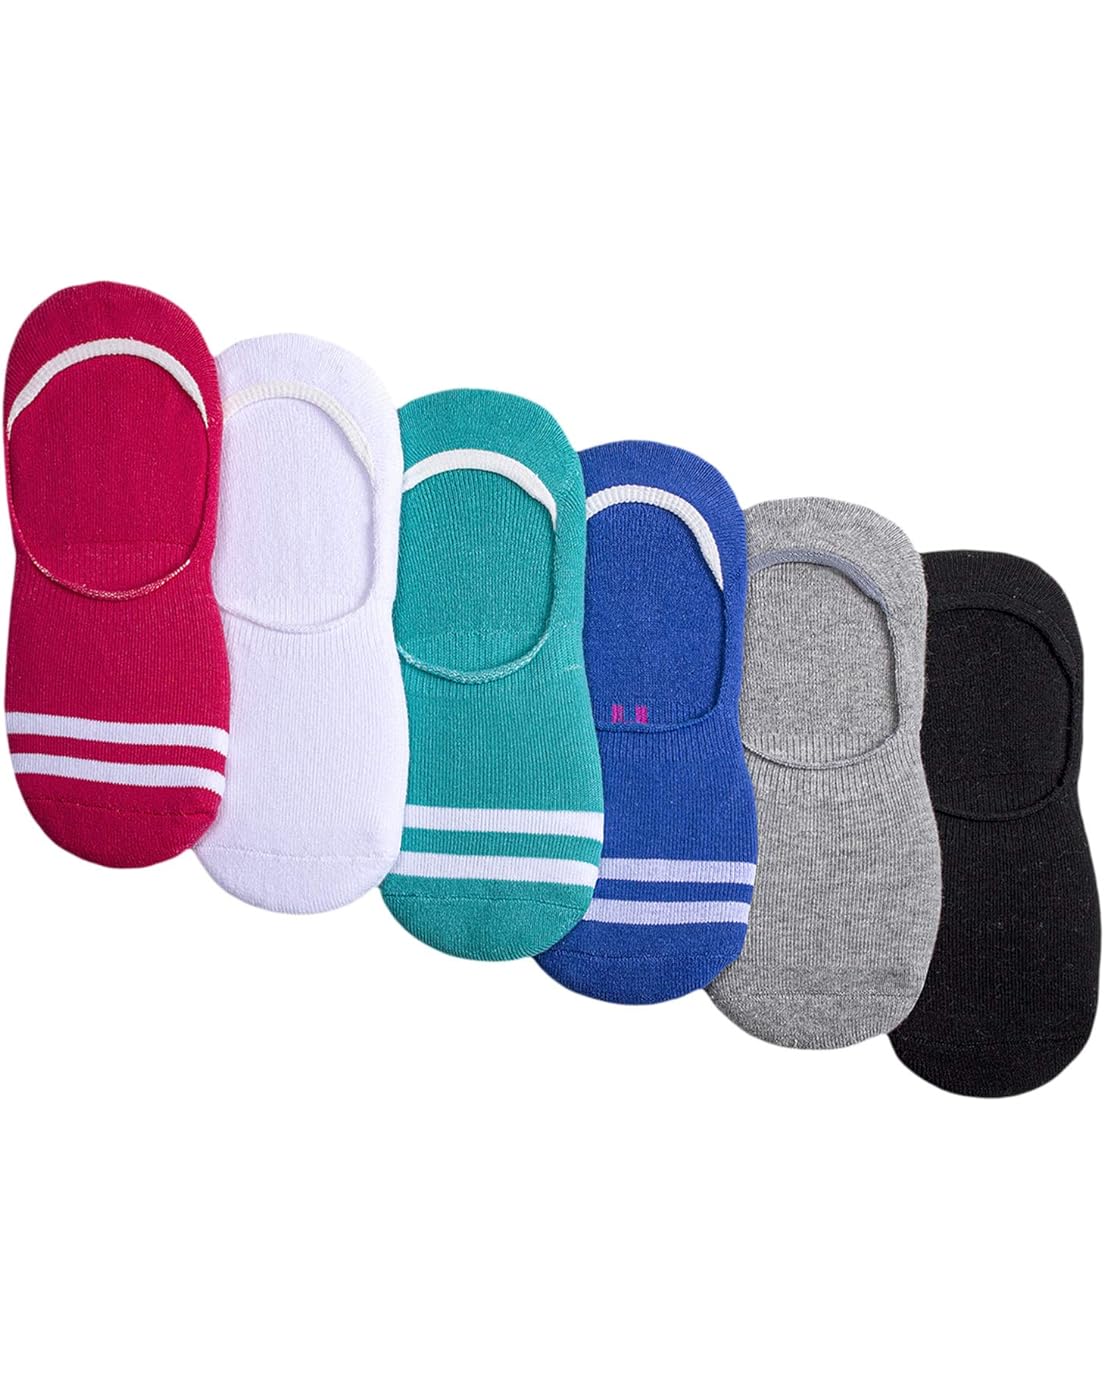 HUE Sneaker Liner with Cushion 6-Pair Pack